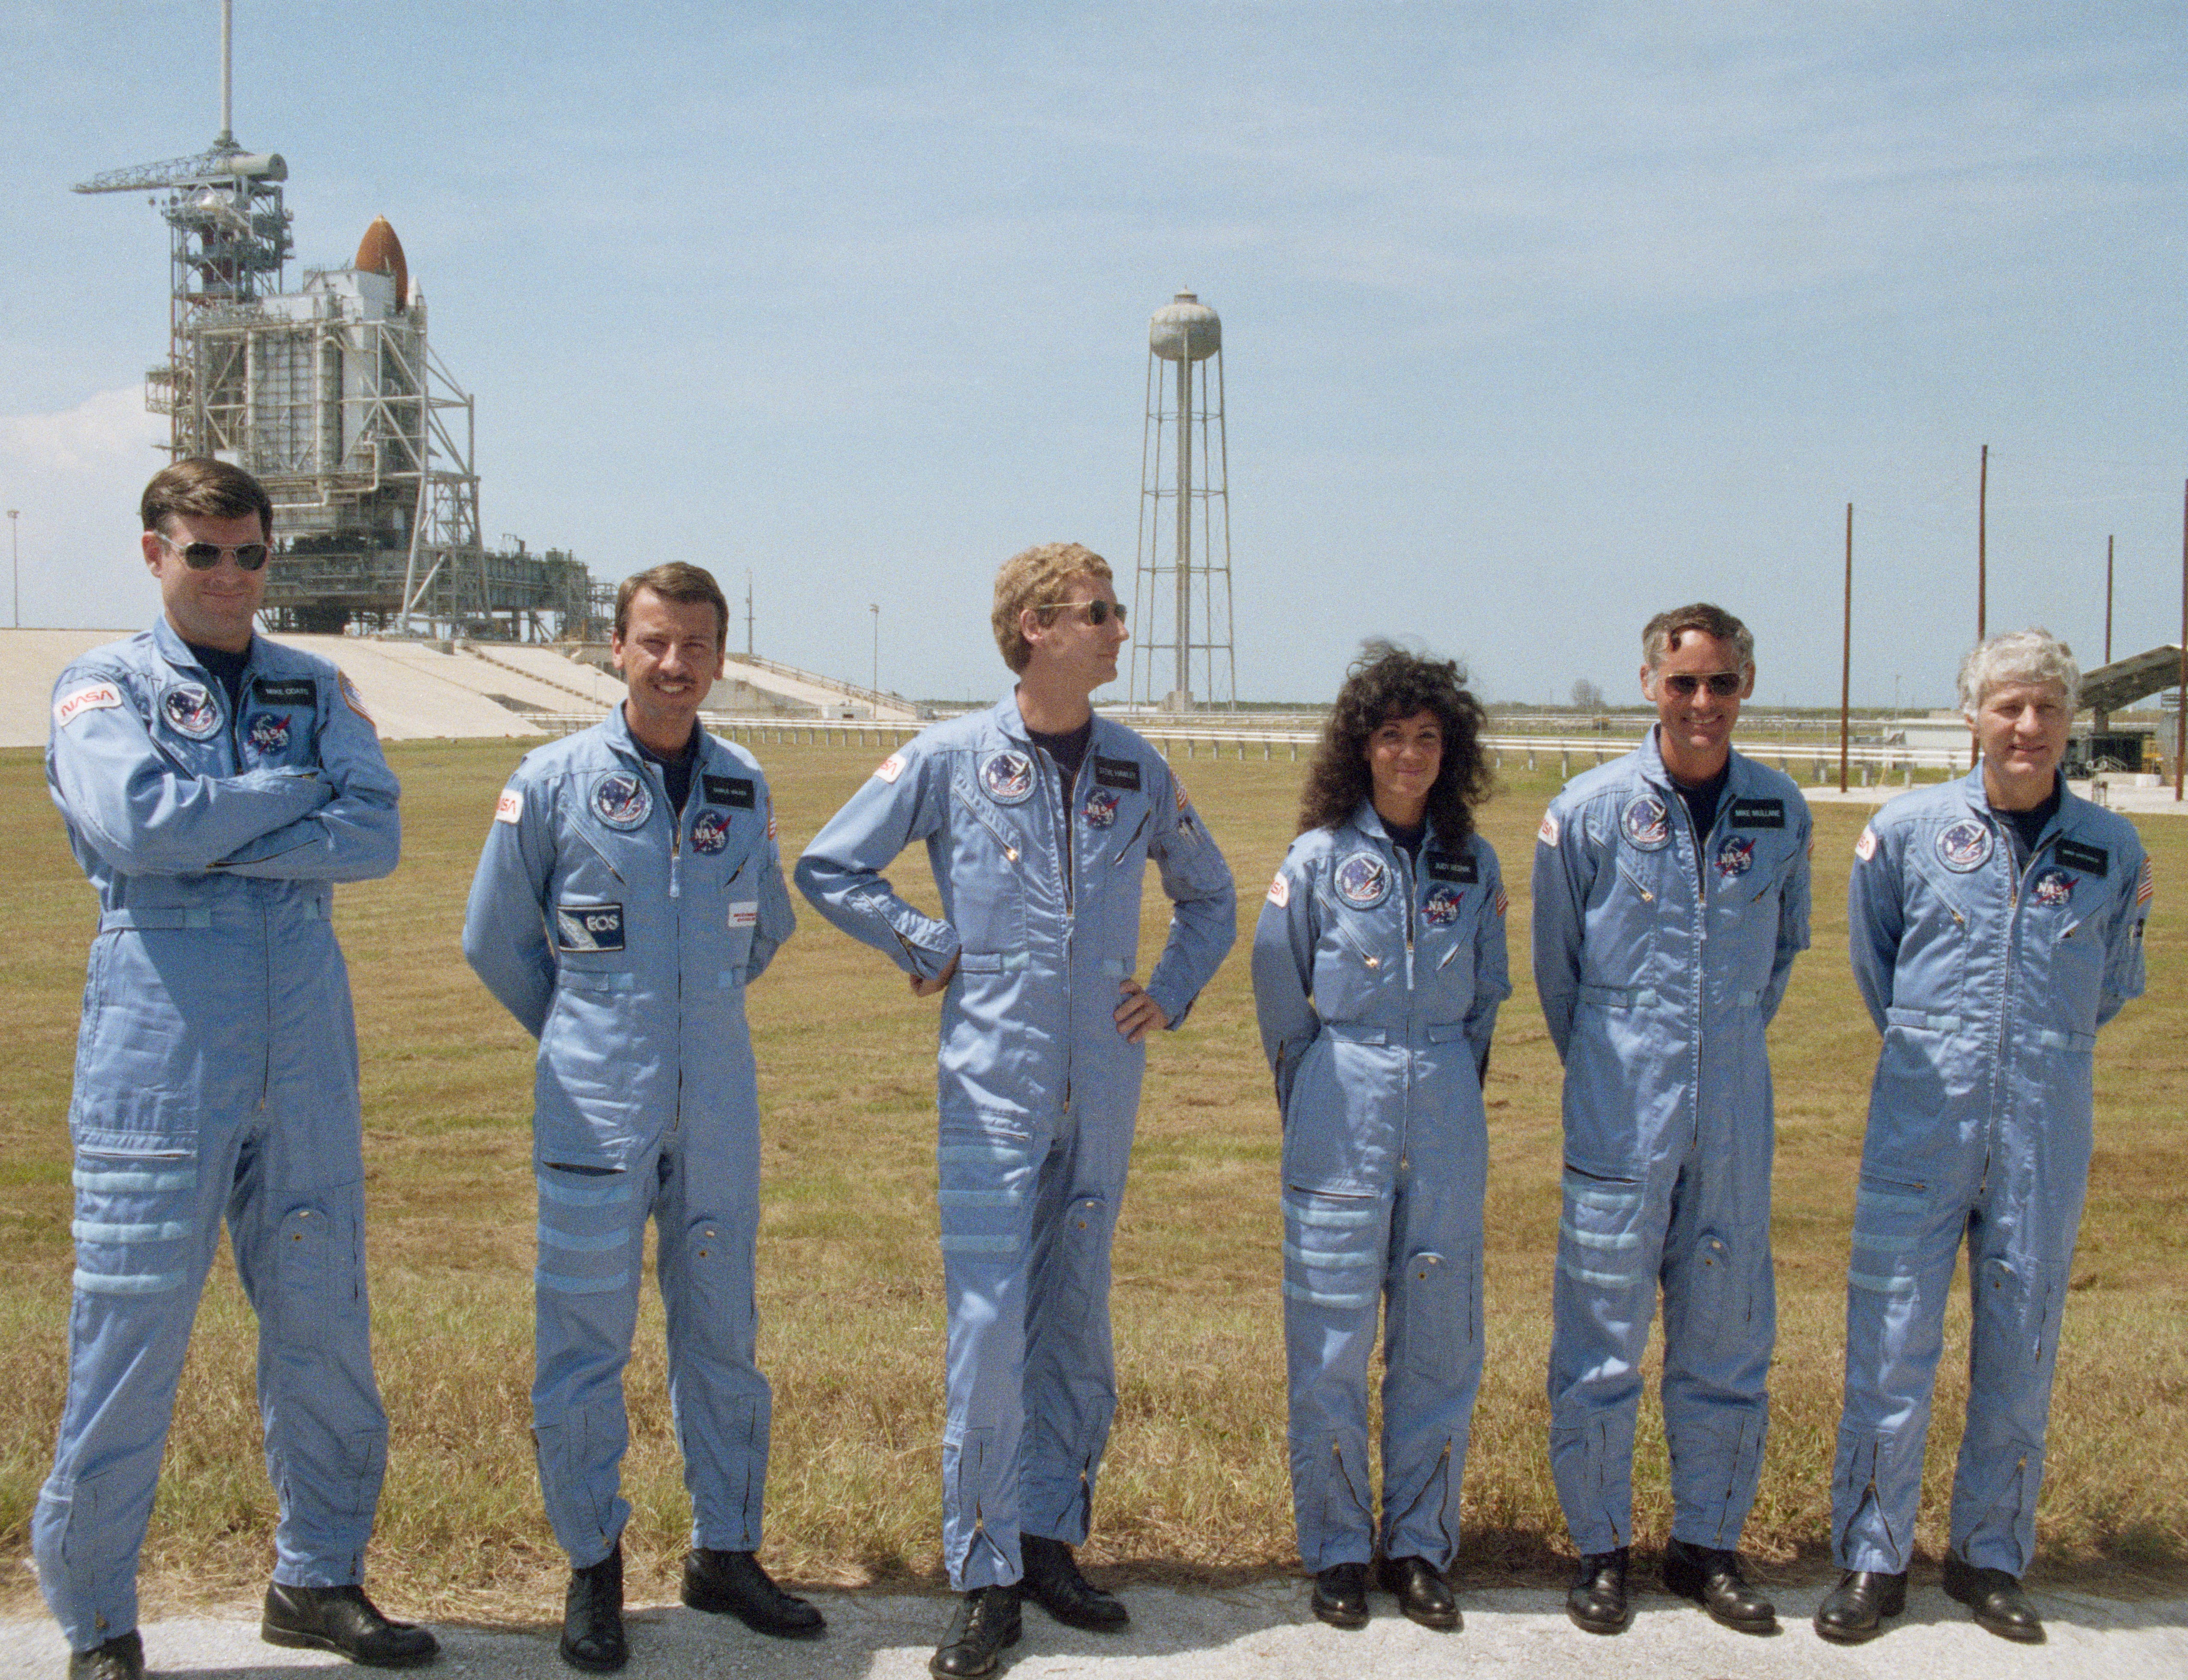 With Discovery as a back drop, STS-41D astronauts Michael L. Coats, left, Charles D. Walker, Steven A. Hawley, Judith A. Resnik, Richard M. “Mike” Mullane, and Henry W. “Hank” Hartsfield pose for photographers following the countdown demonstration test